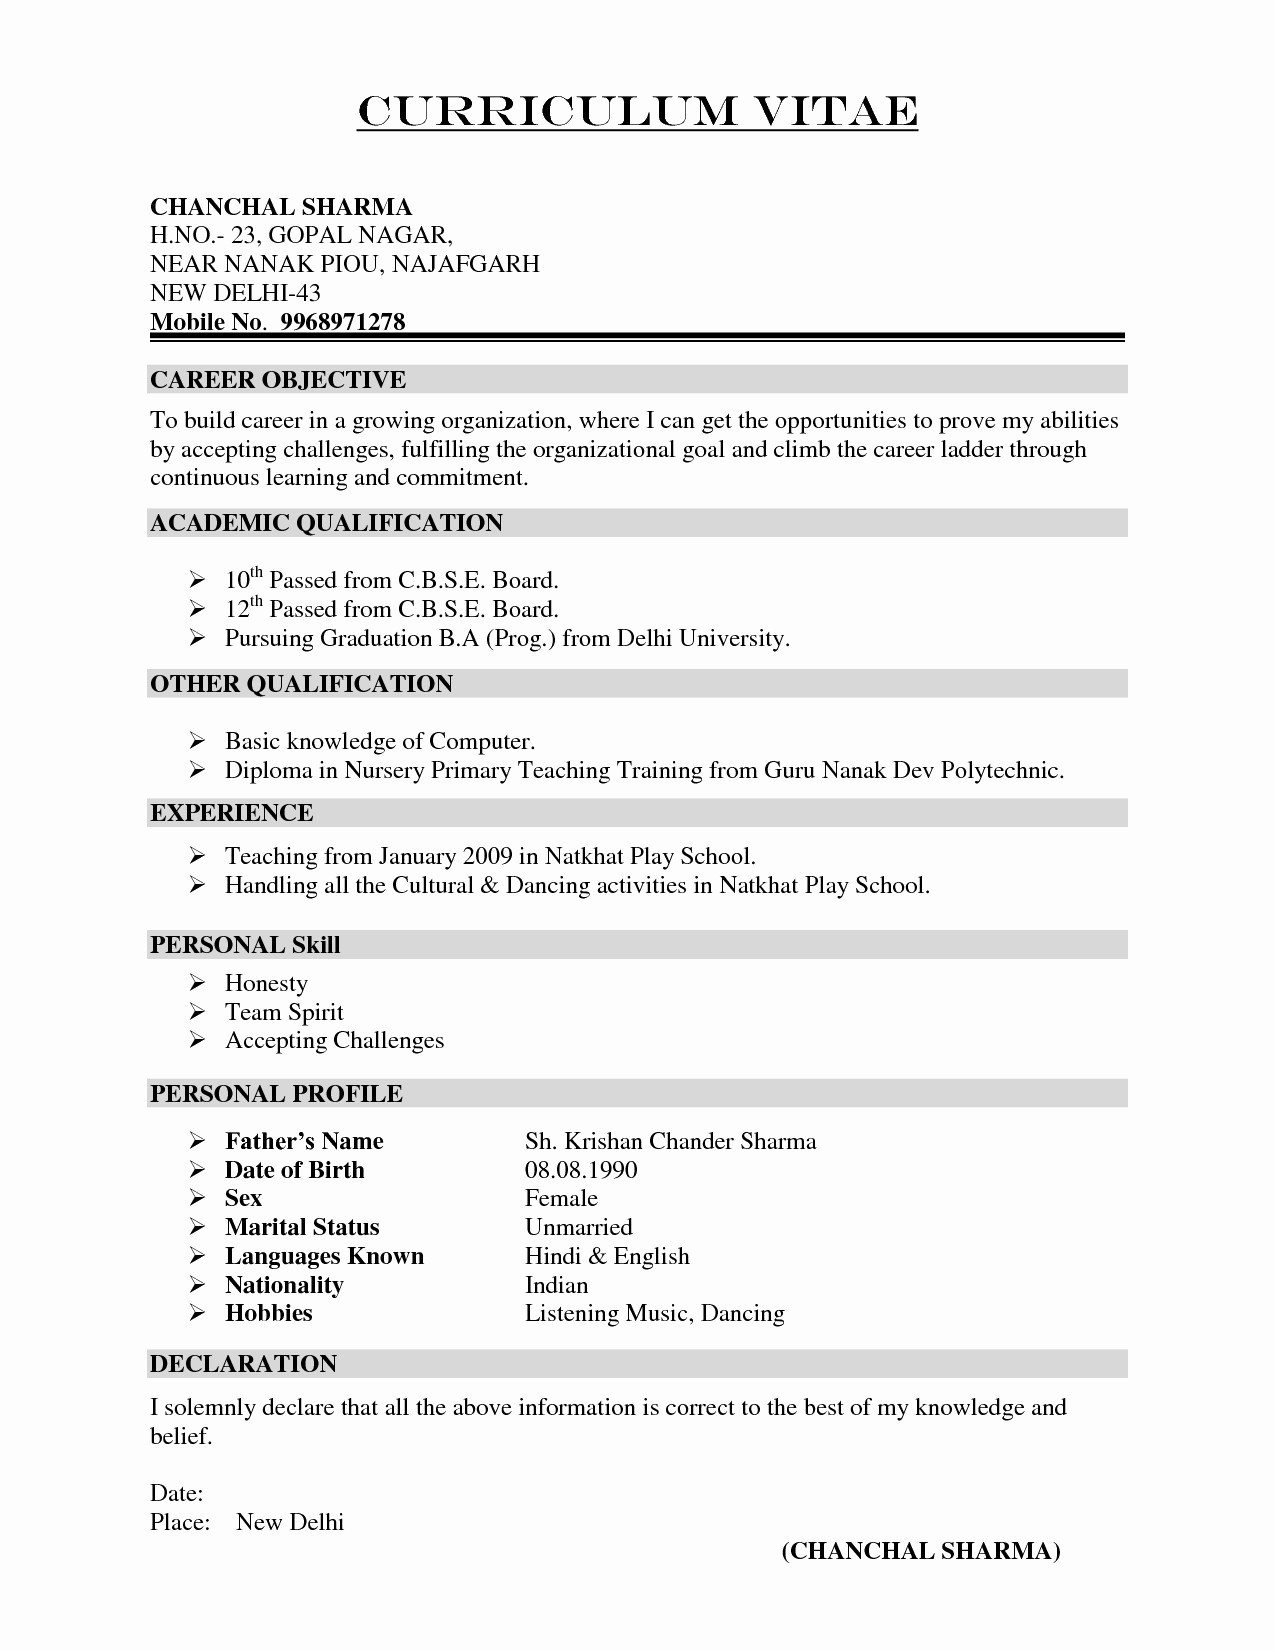 Best Cover Letter Template - Resumes and Cover Letters Elegant New Resume Cover Letter formatted